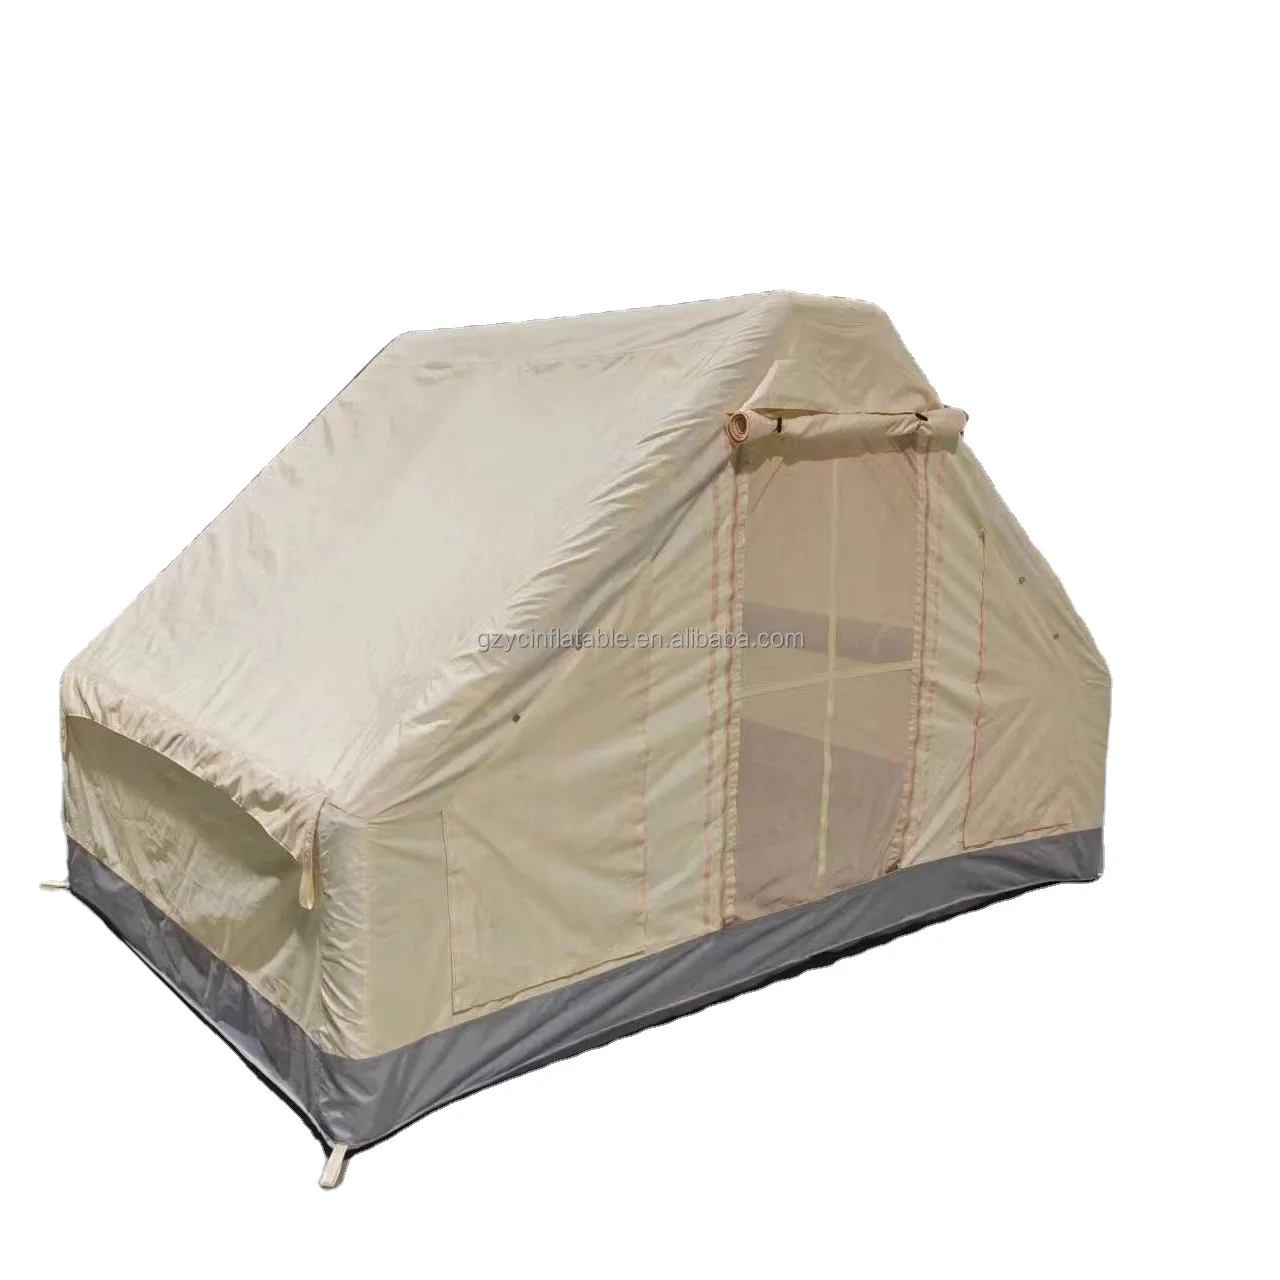 China outdoor 3m oxford fabric inflatable camping tent for sale (1600788662077)